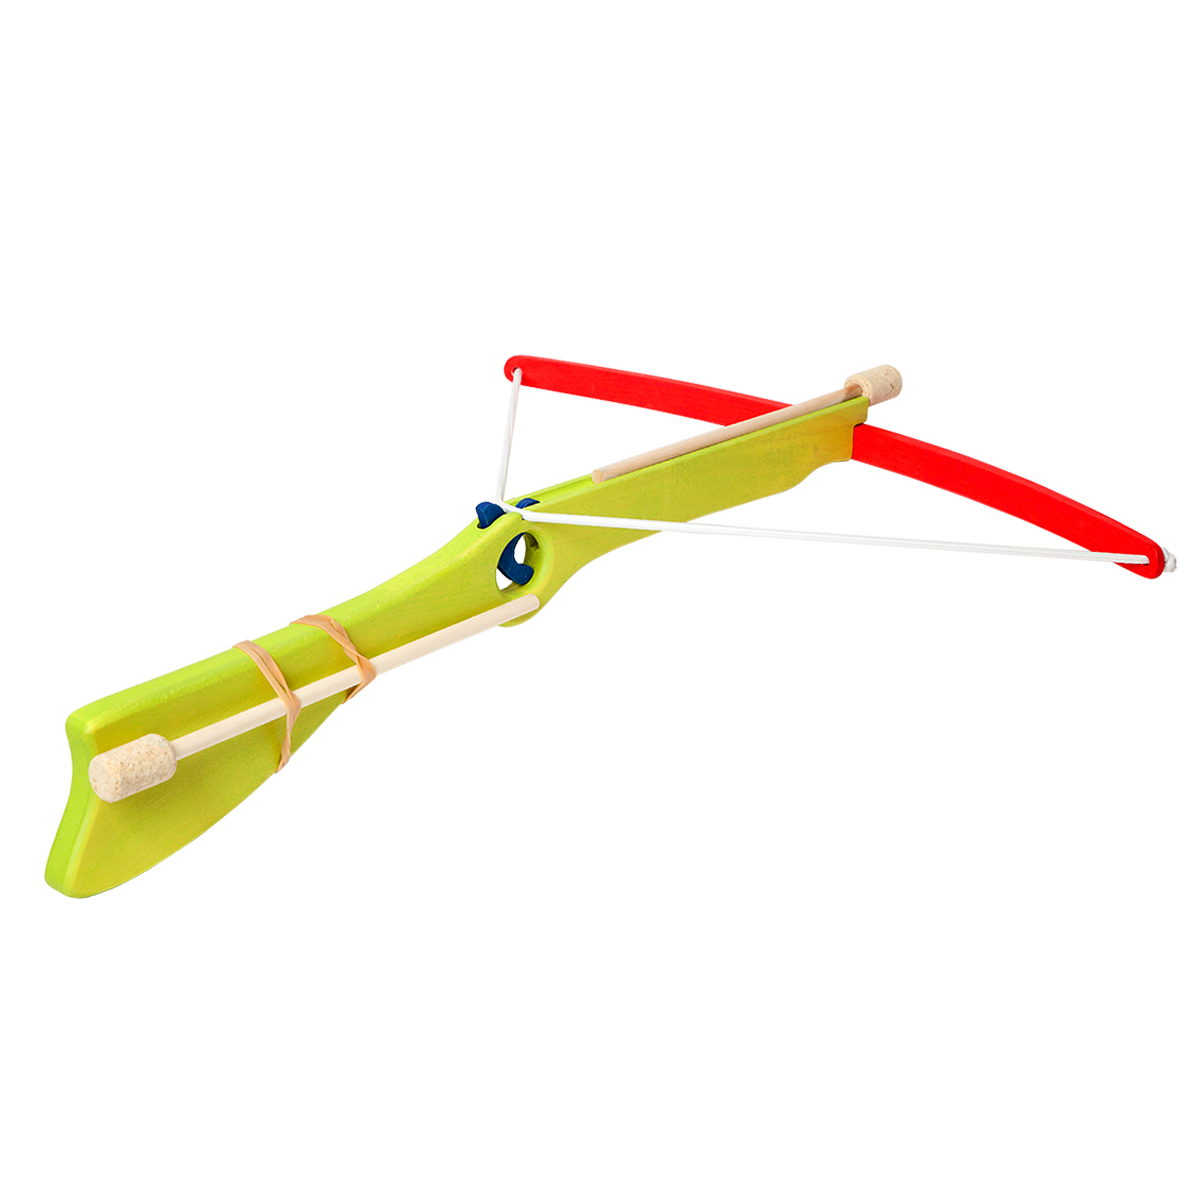 Green wooden toy crossbow with cork arrows